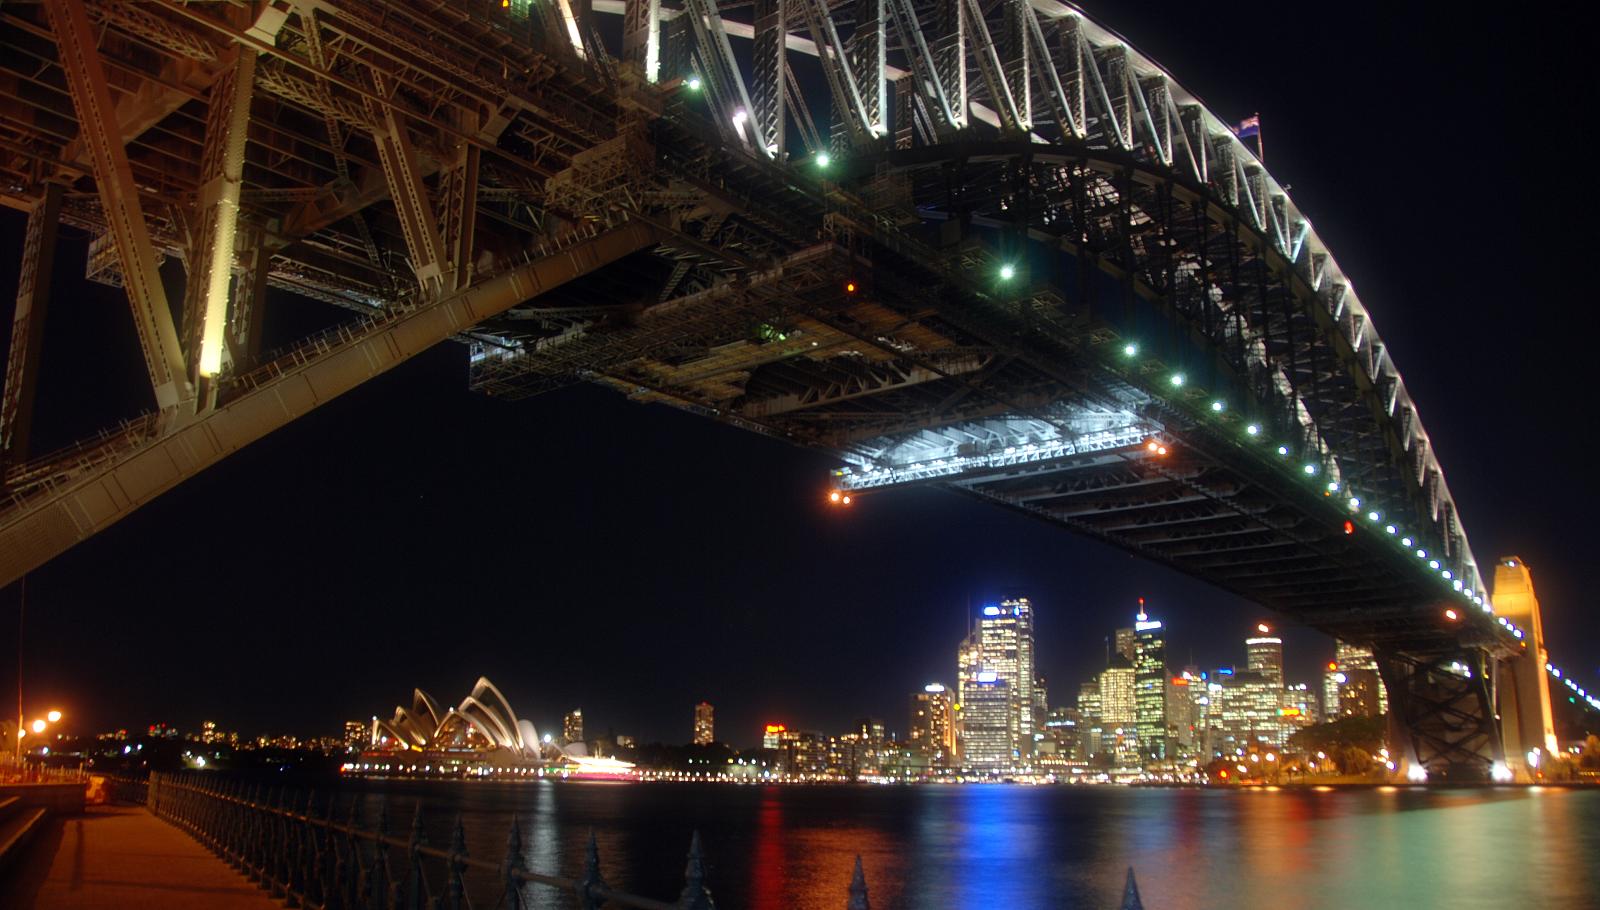 "Sydney Harbor" by Michael McDonough is licensed under CC BY-NC-ND 2.0